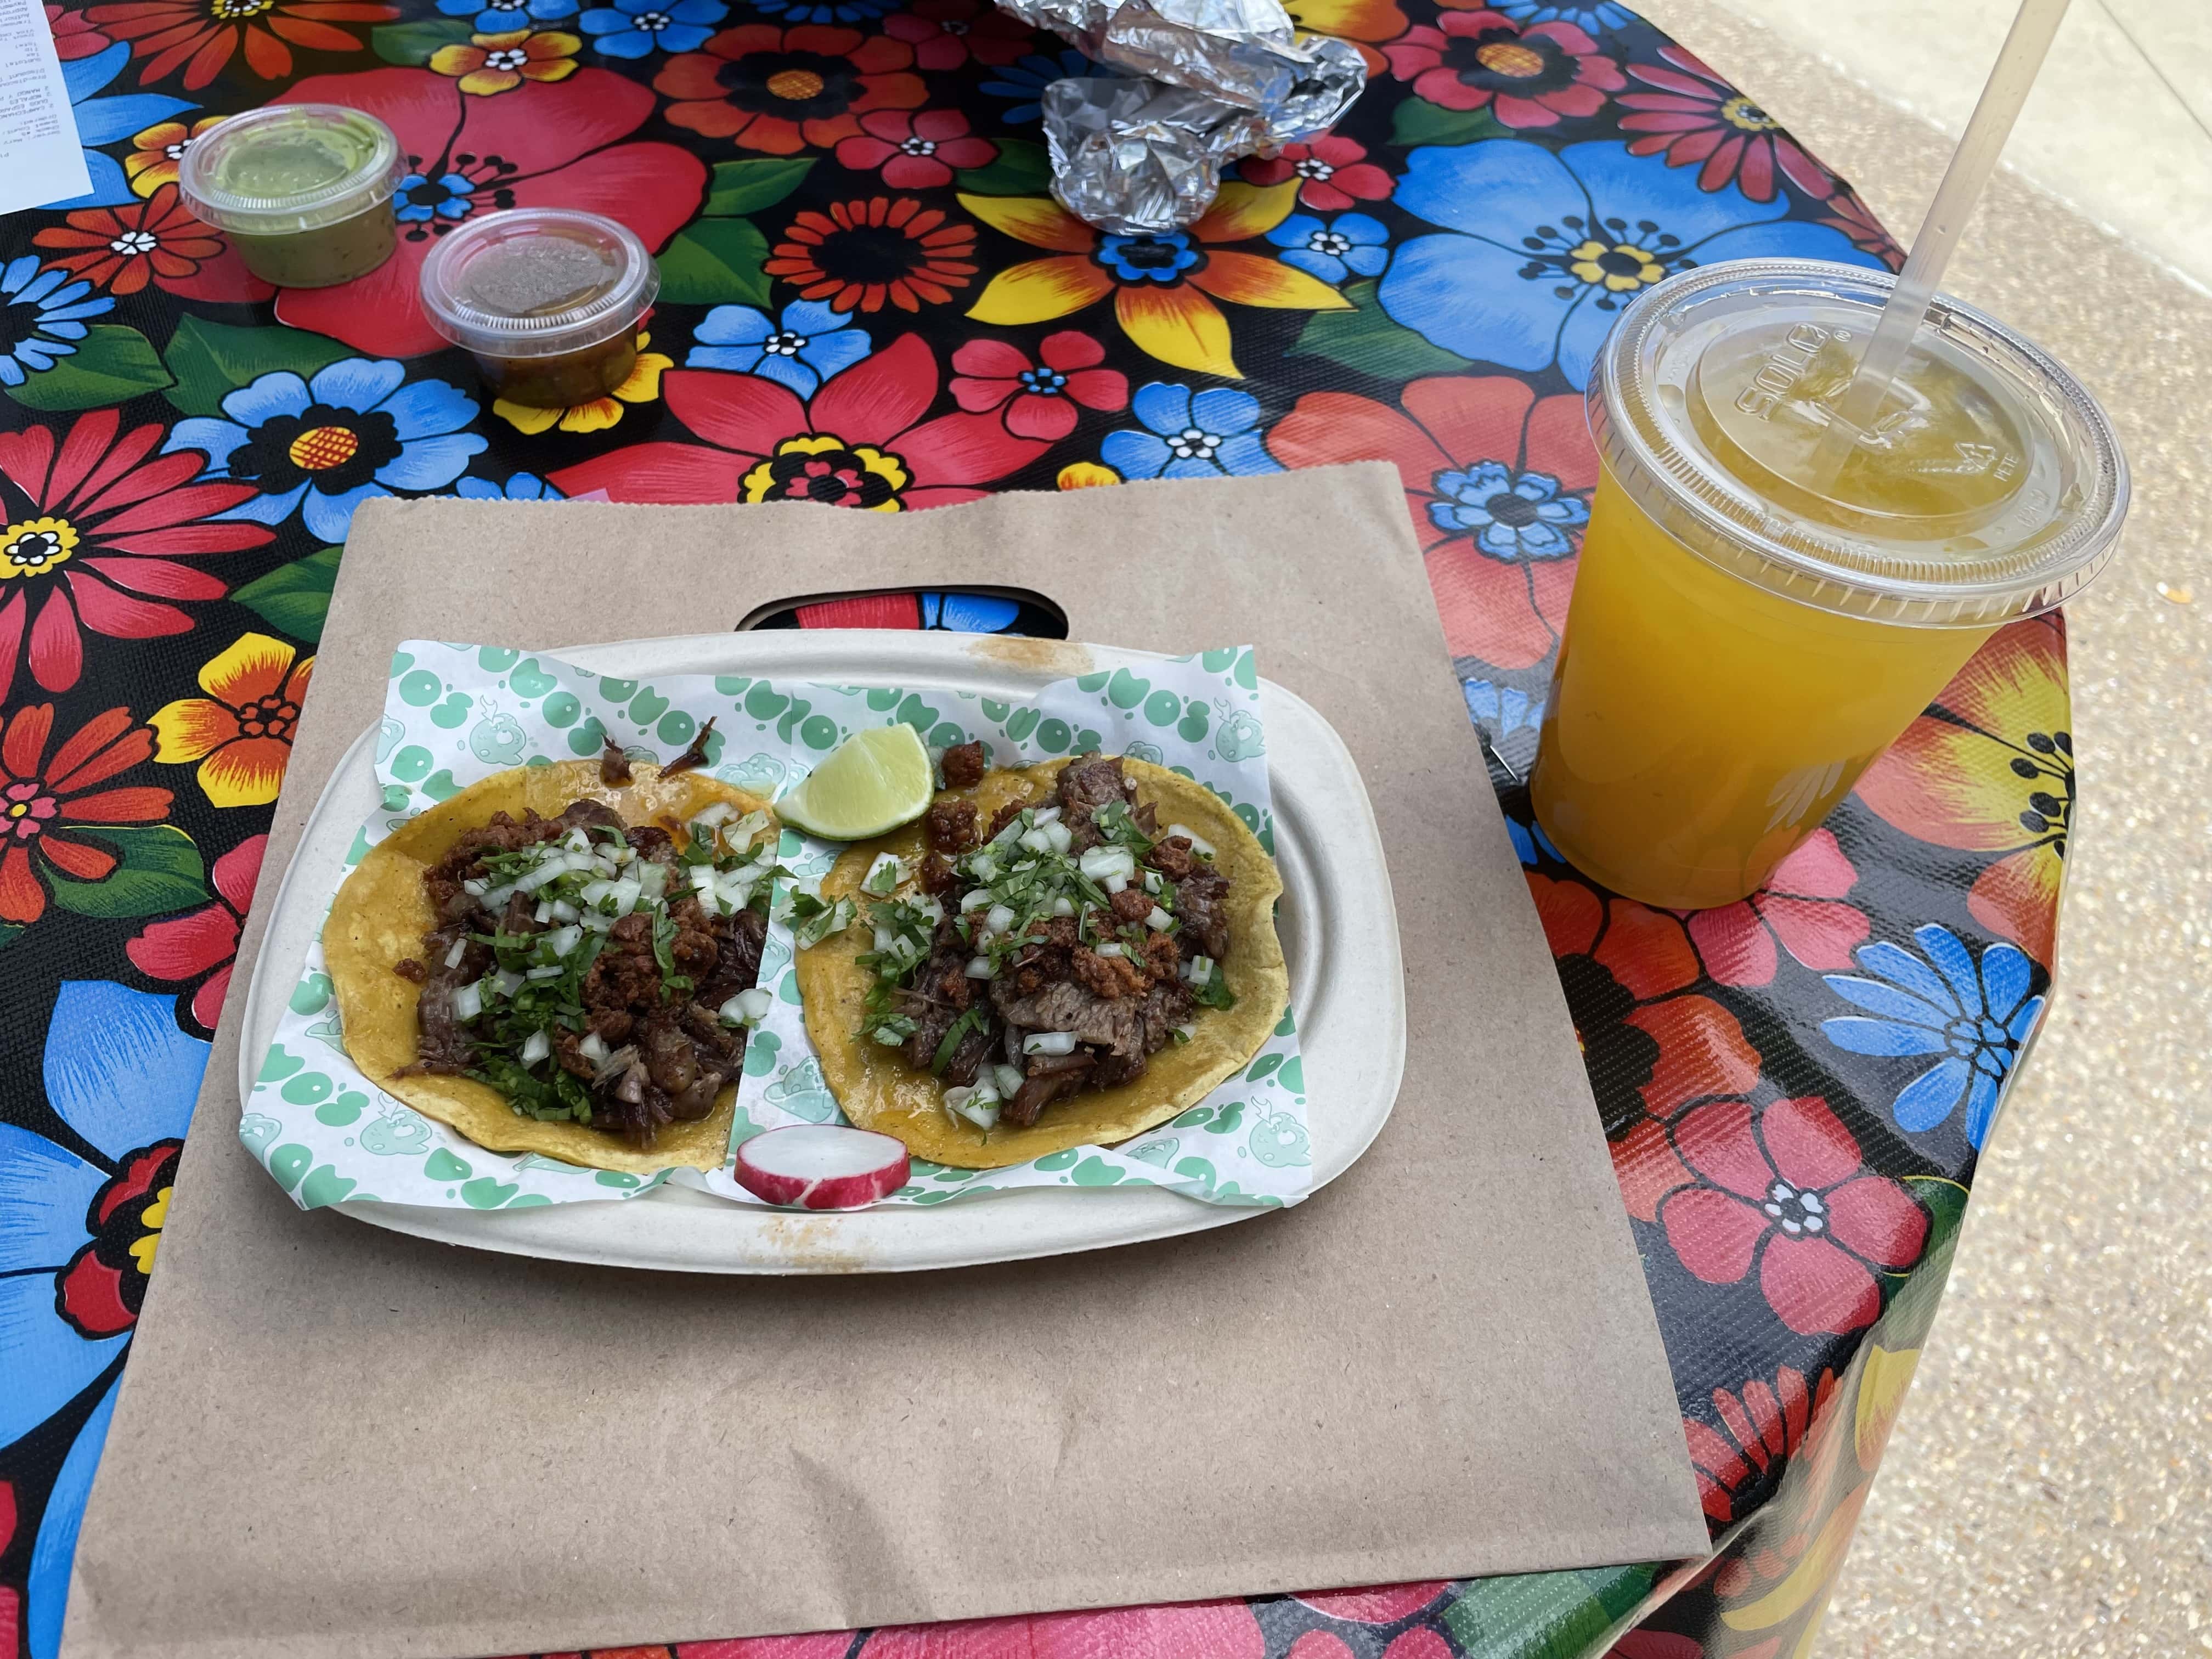 The food from Duo’s Taqueria.